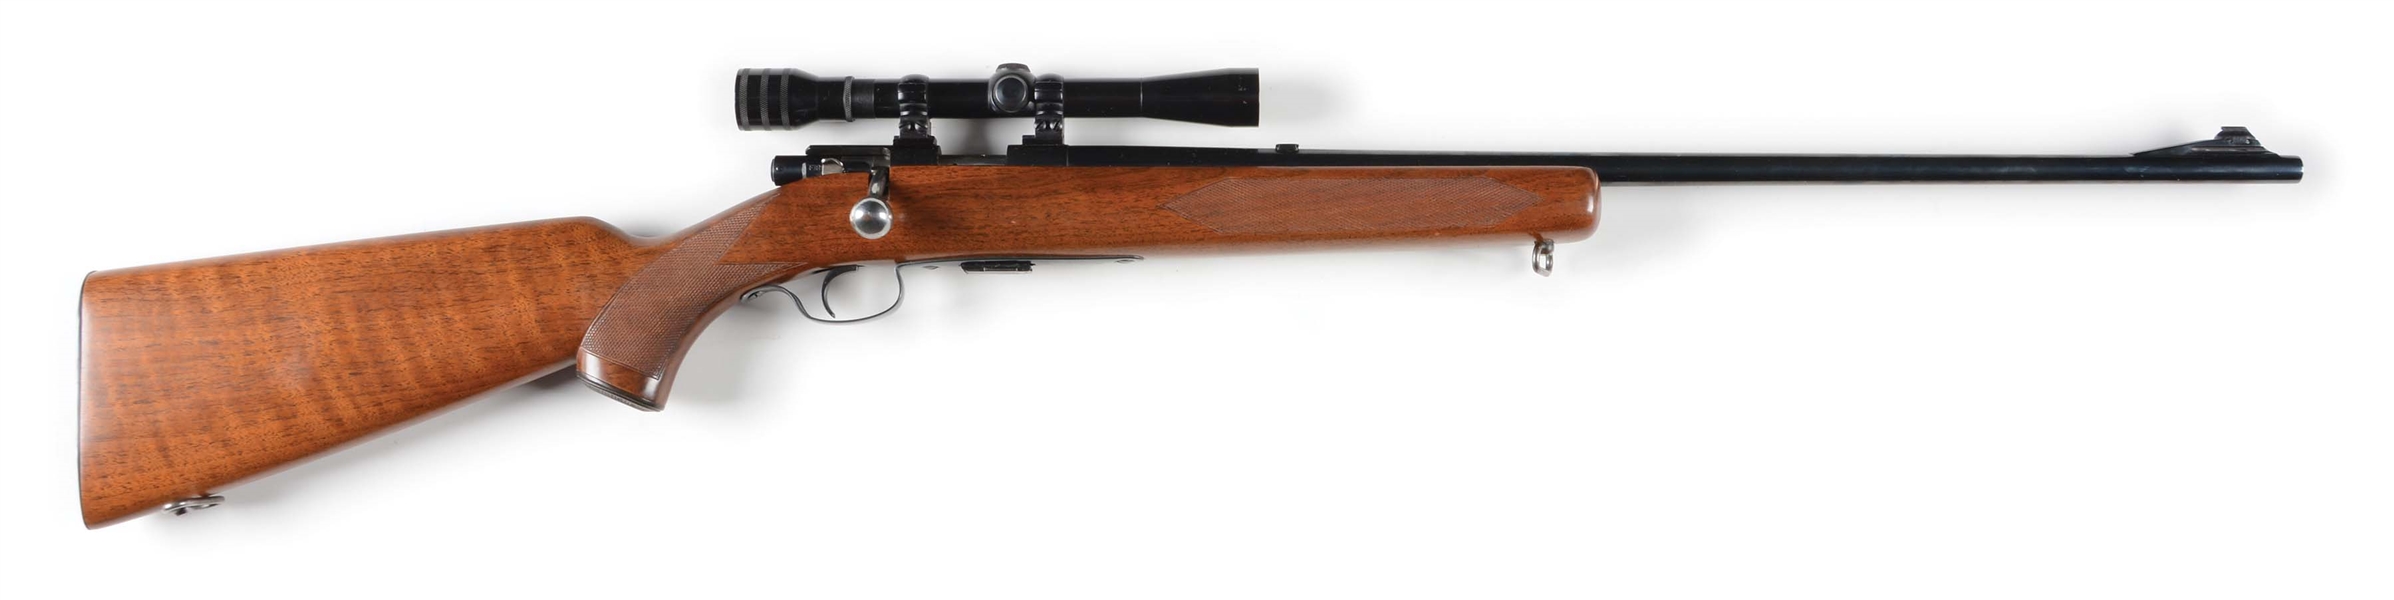 (C) PRE-WAR WINCHESTER MODEL 75 BOLT ACTION SPORTING RIFLE (1941).